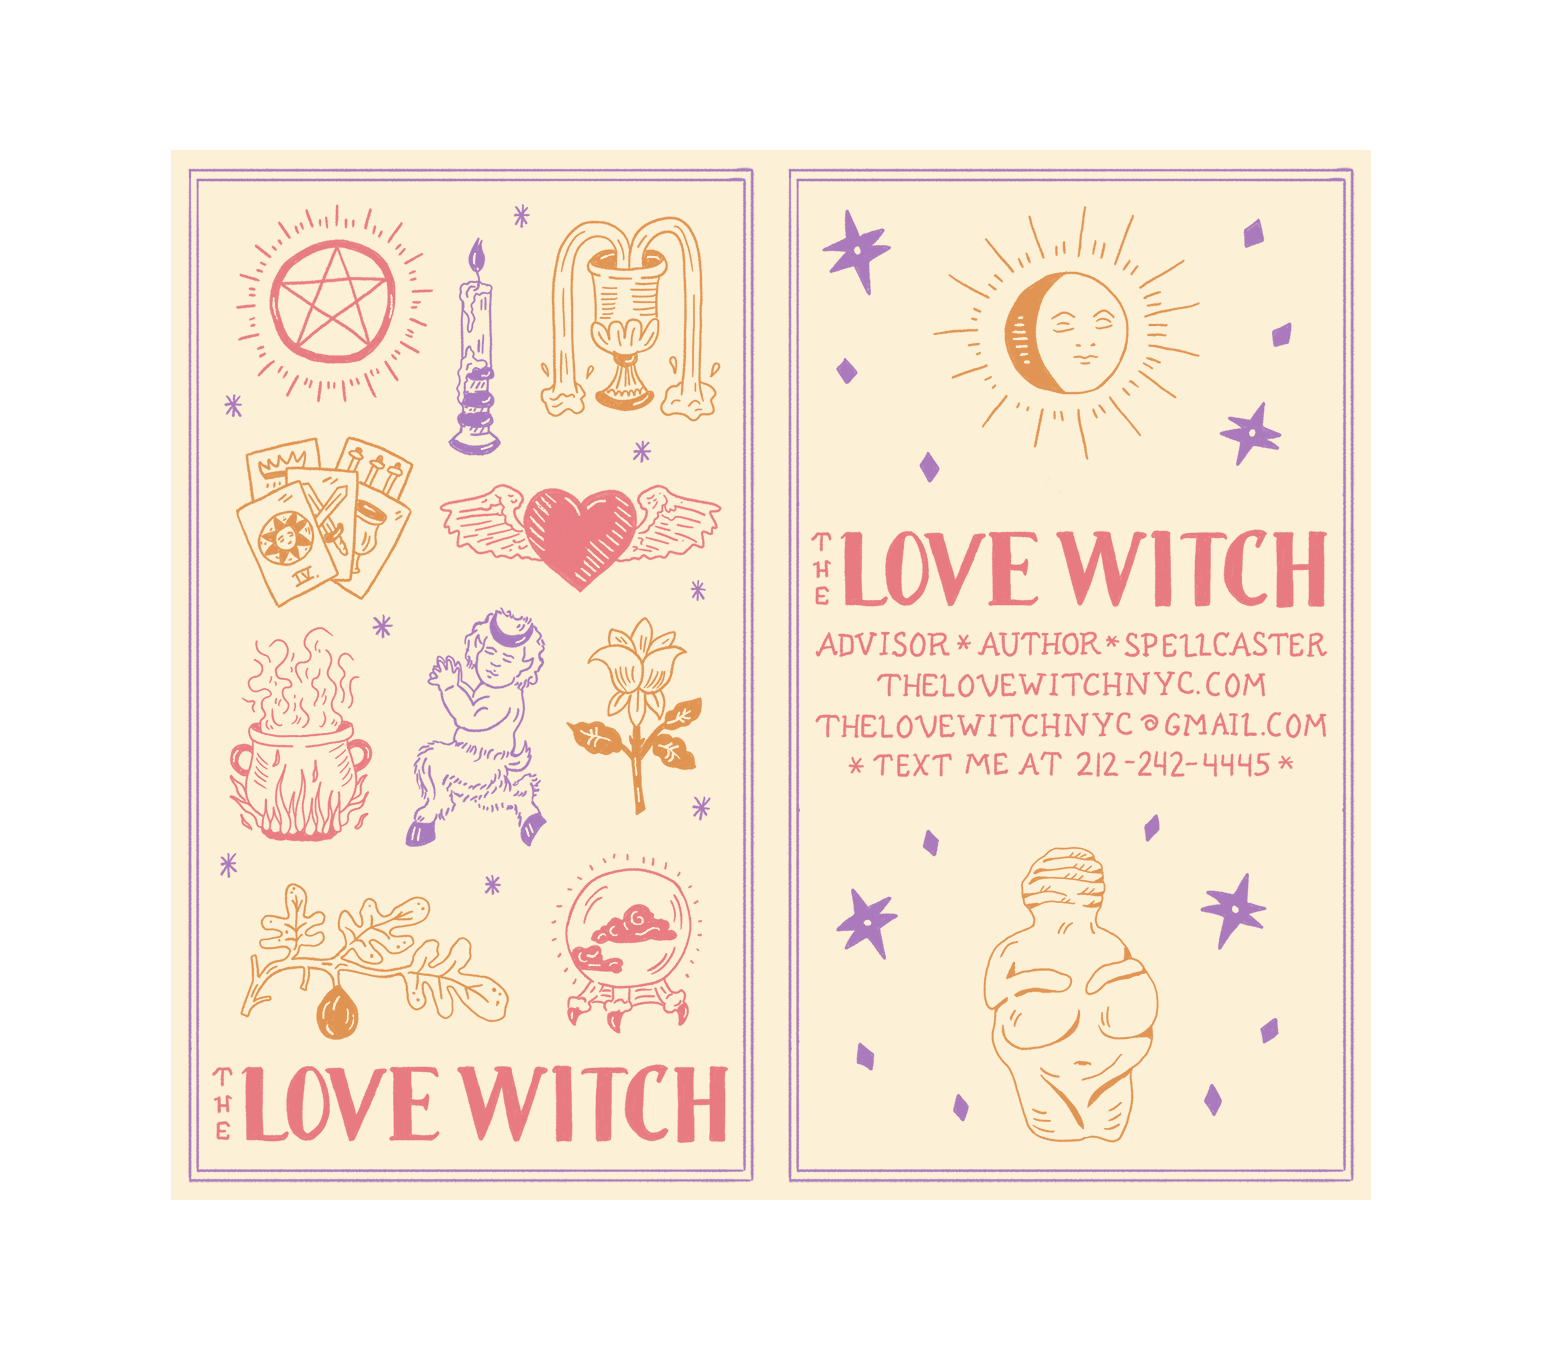 The Love Witch NYC